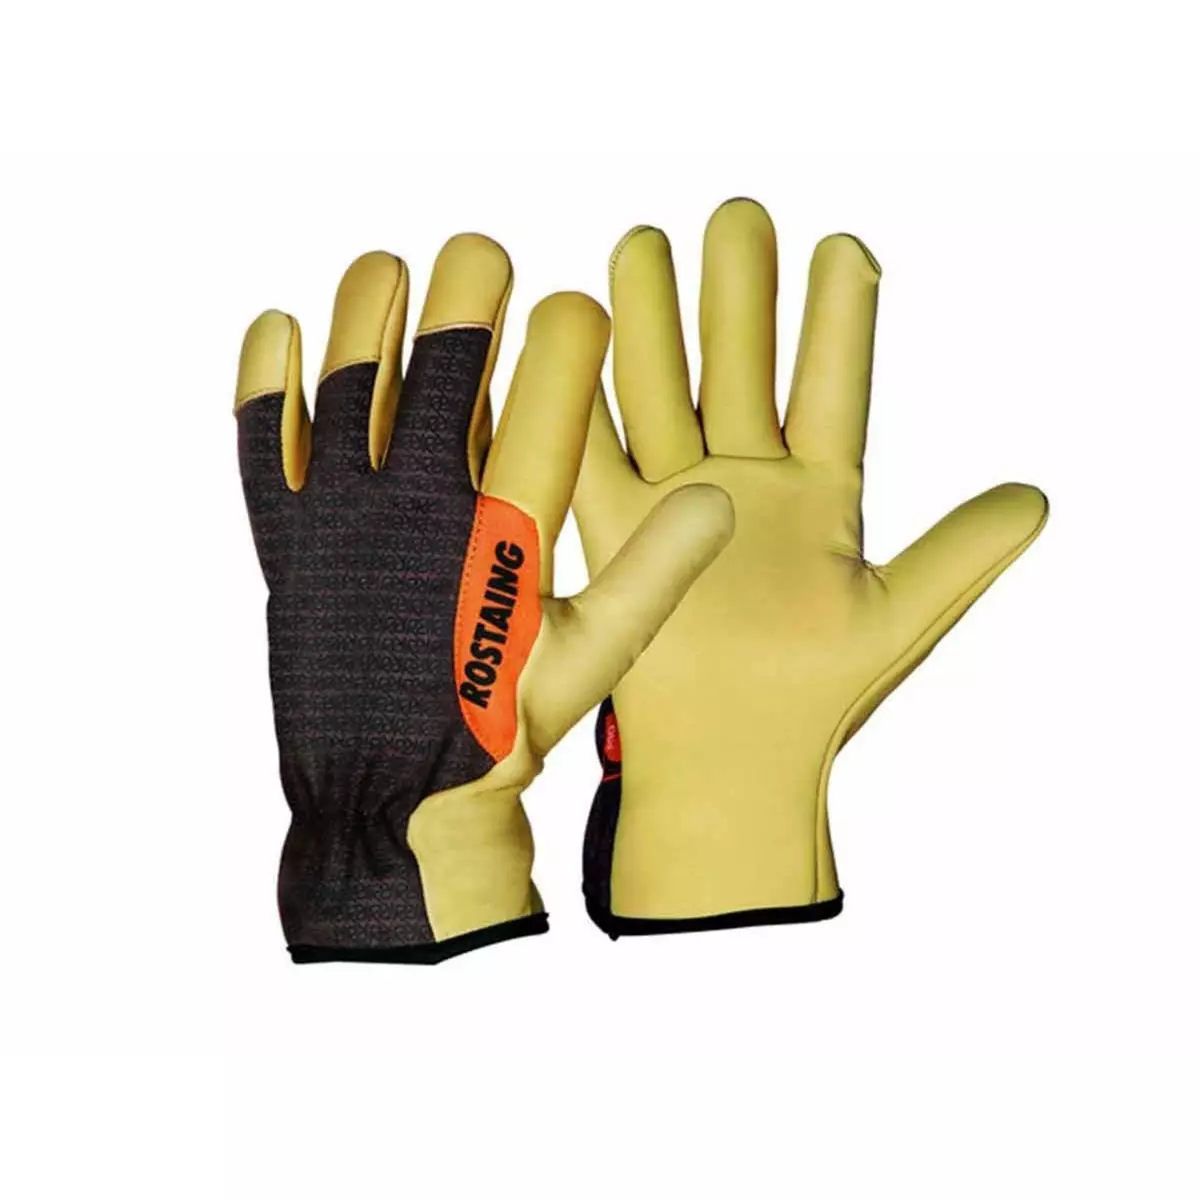 ROSTAING Gants de protection SEQUOIA Jardinage - Taille 12 - Rostaing